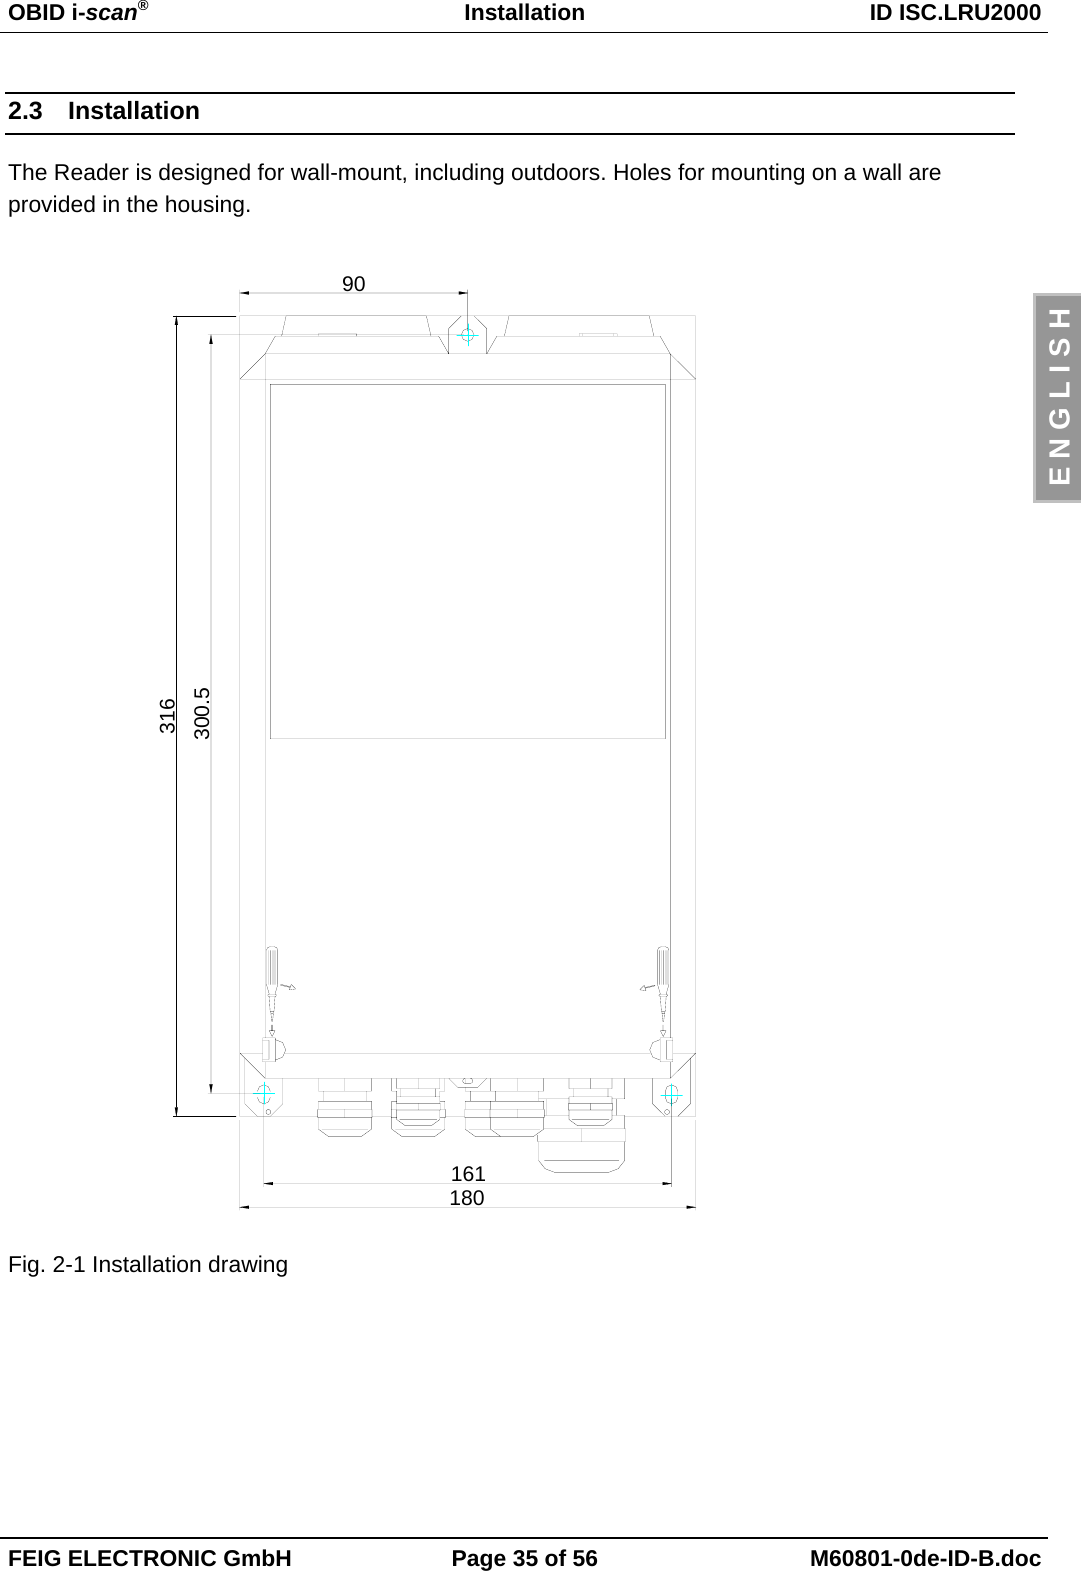 OBID i-scan®Installation ID ISC.LRU2000FEIG ELECTRONIC GmbH Page 35 of 56 M60801-0de-ID-B.docE N G L I S H2.3 InstallationThe Reader is designed for wall-mount, including outdoors. Holes for mounting on a wall areprovided in the housing.Fig. 2-1 Installation drawing316300.516118090